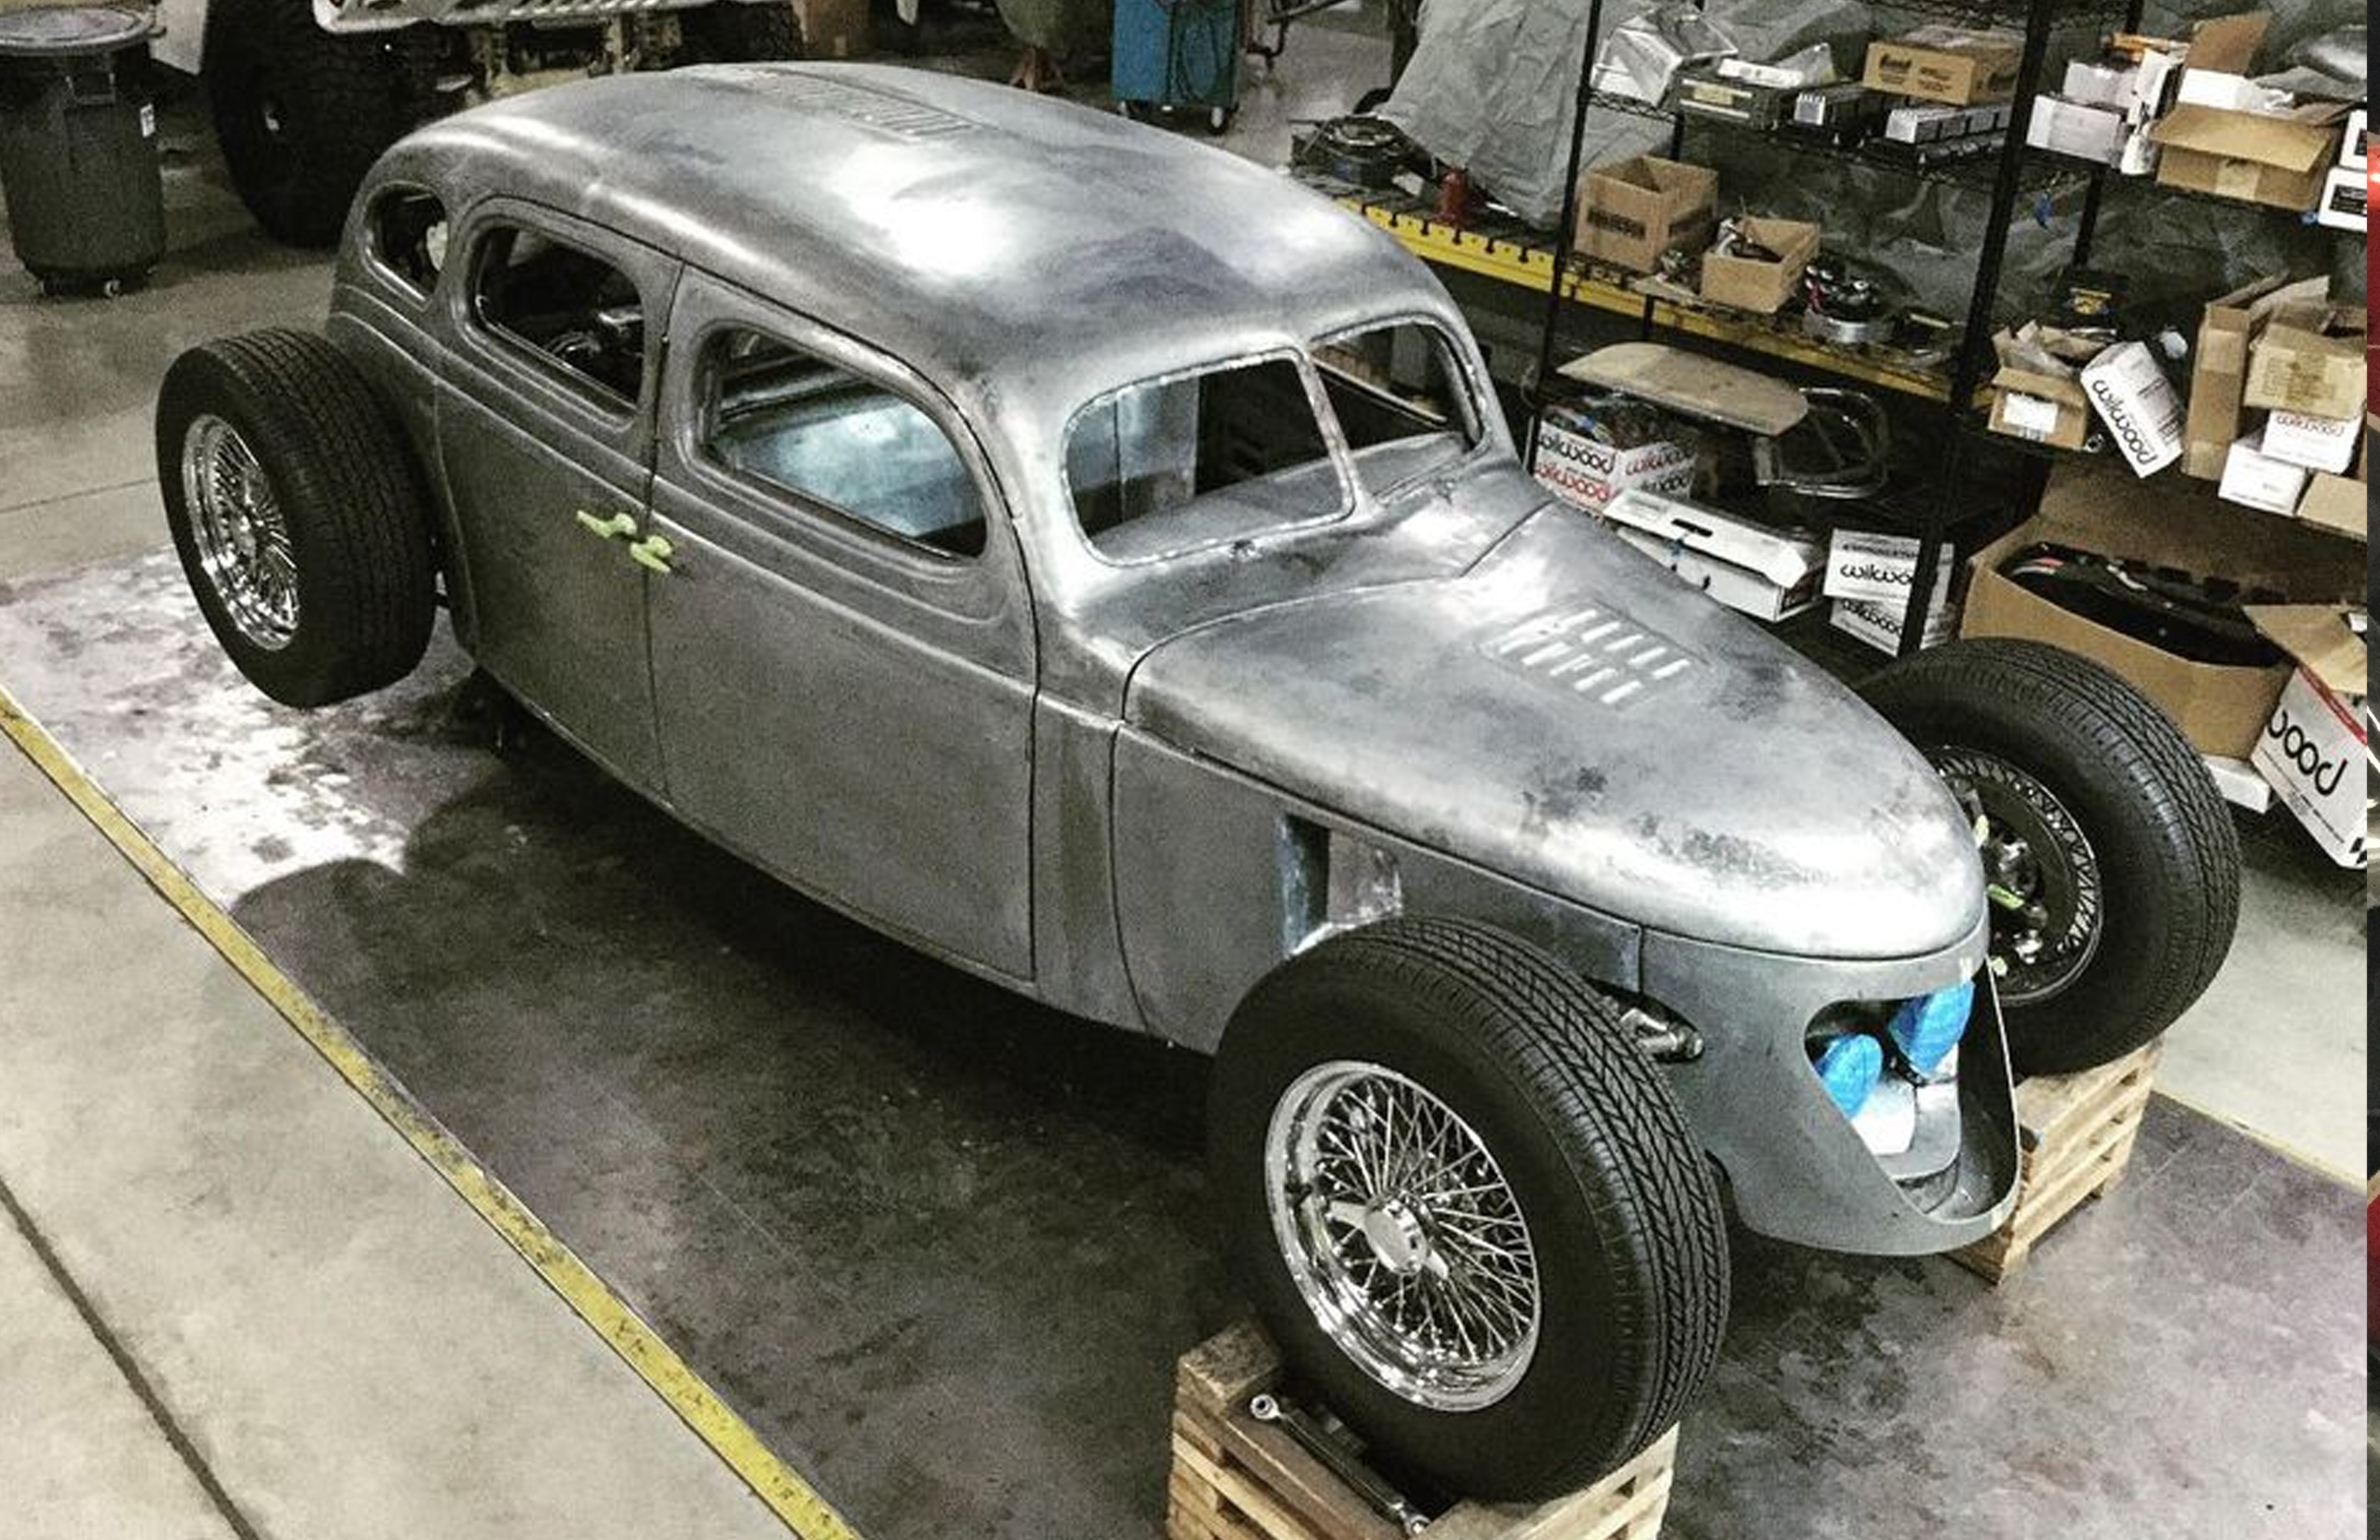 Meeting the challenges of Gary's '39 Dodge at Metal Union Speed Shop